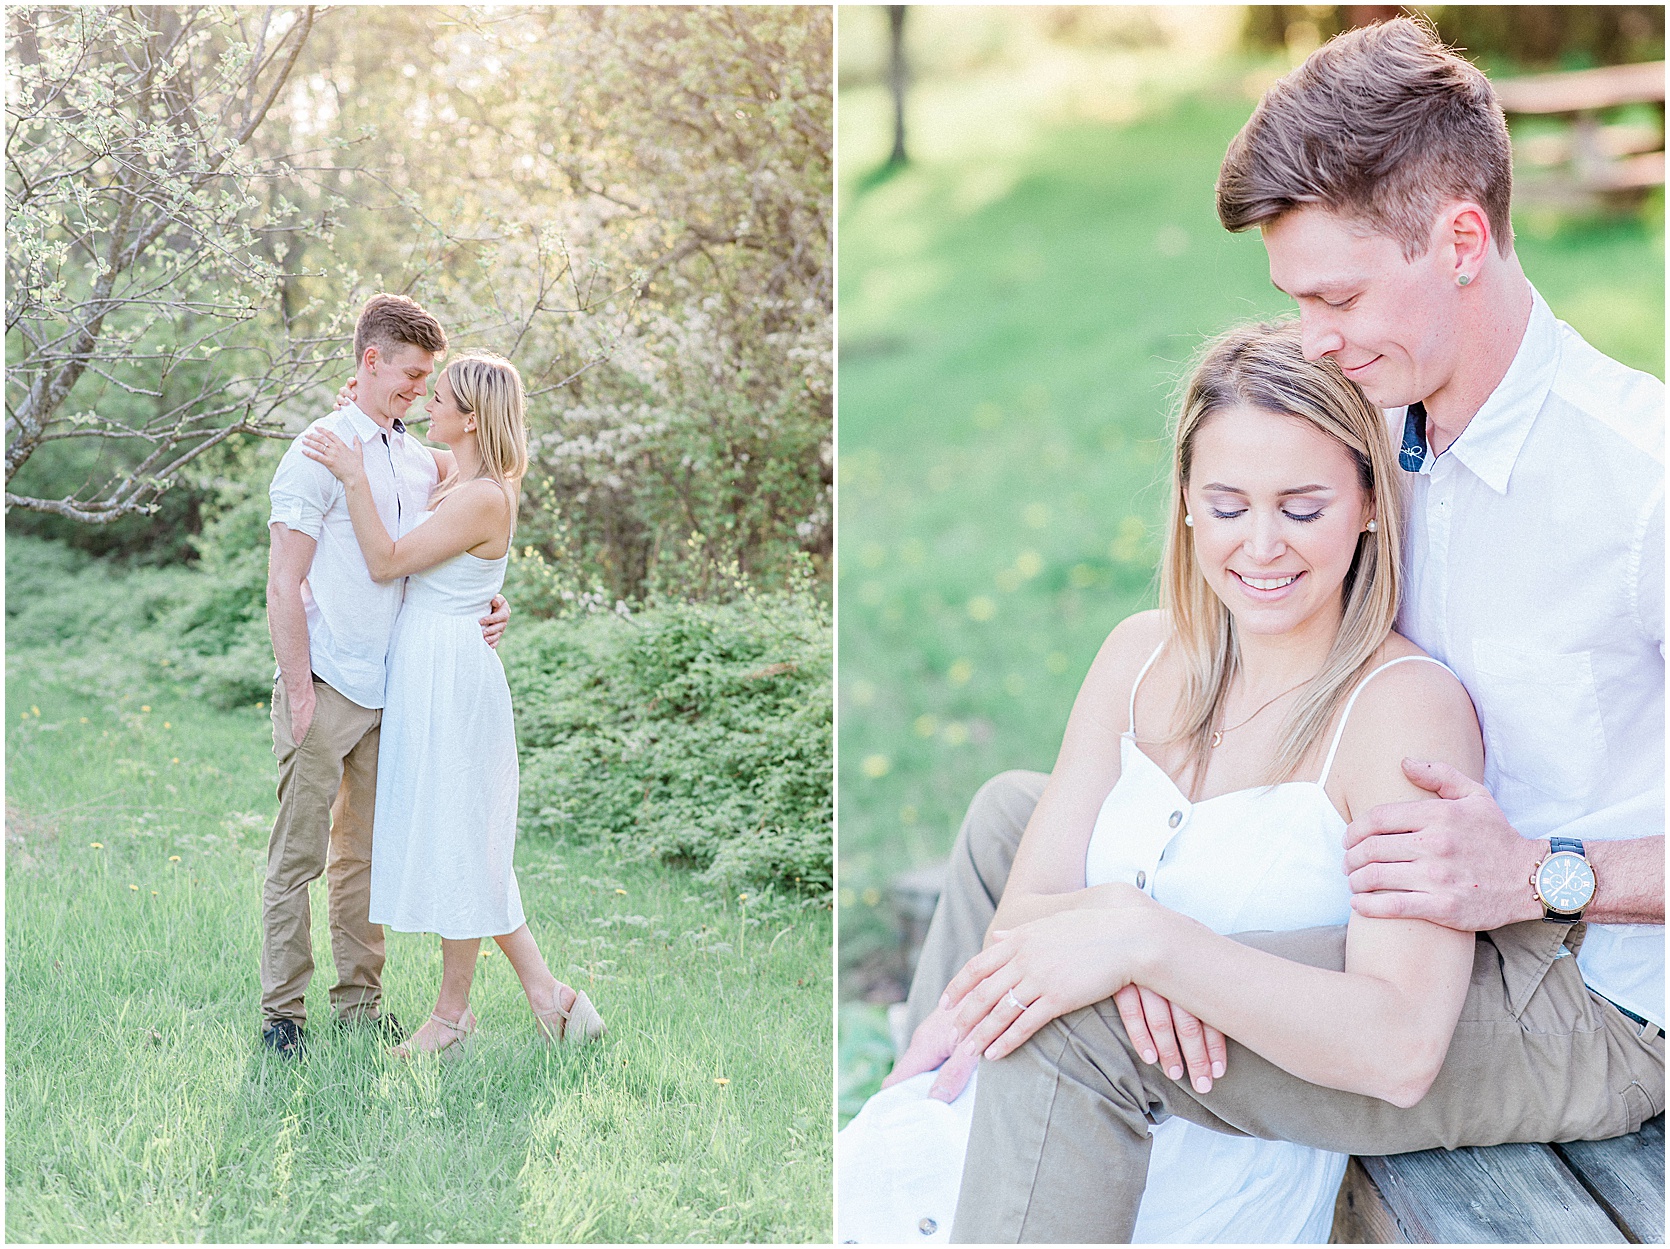 Ottawa engagement session, forest and country - light and airy photographer - photography by emma